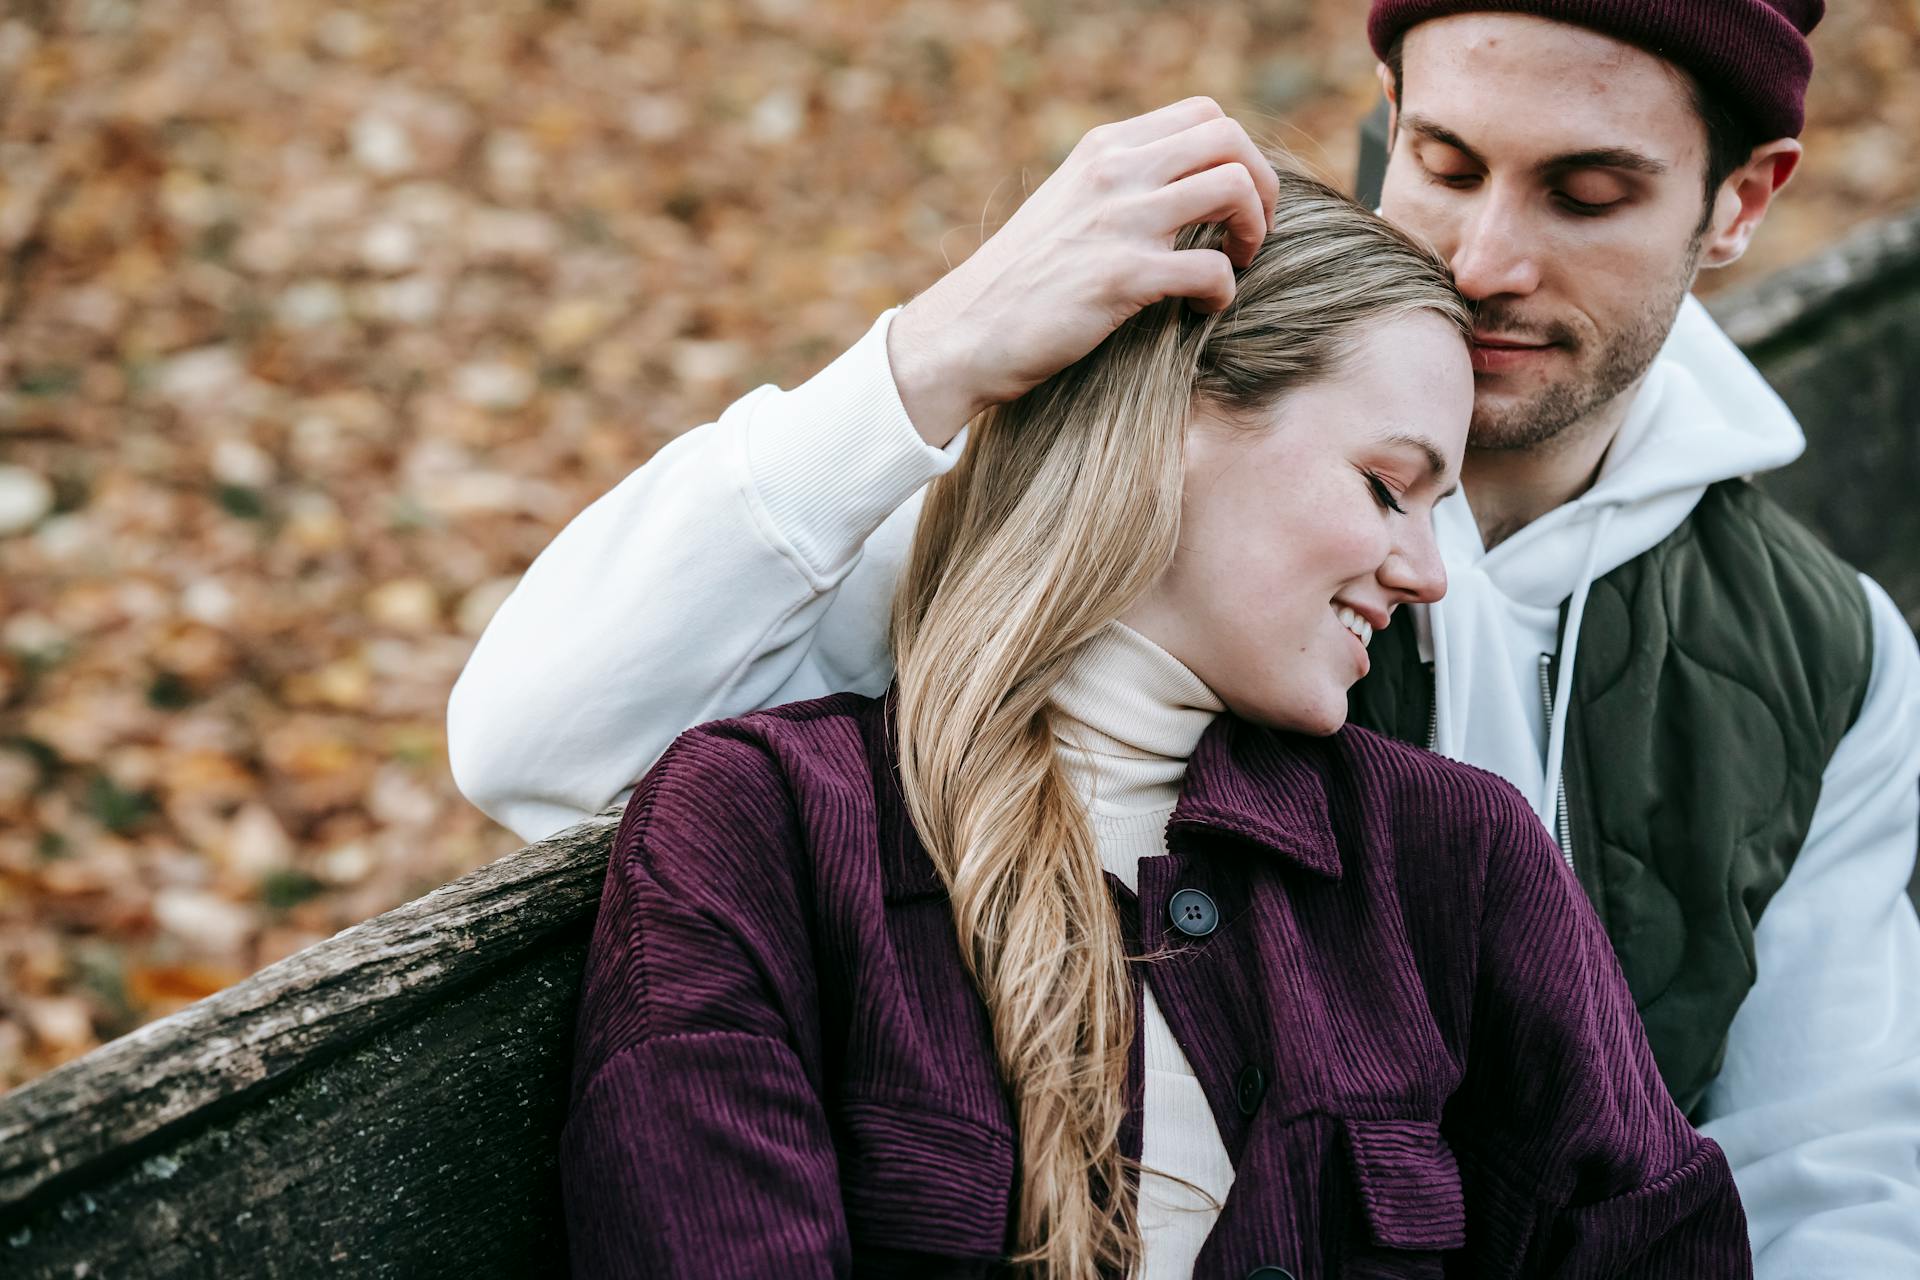 A happy couple relaxing and embracing in a park | Source: Pexels